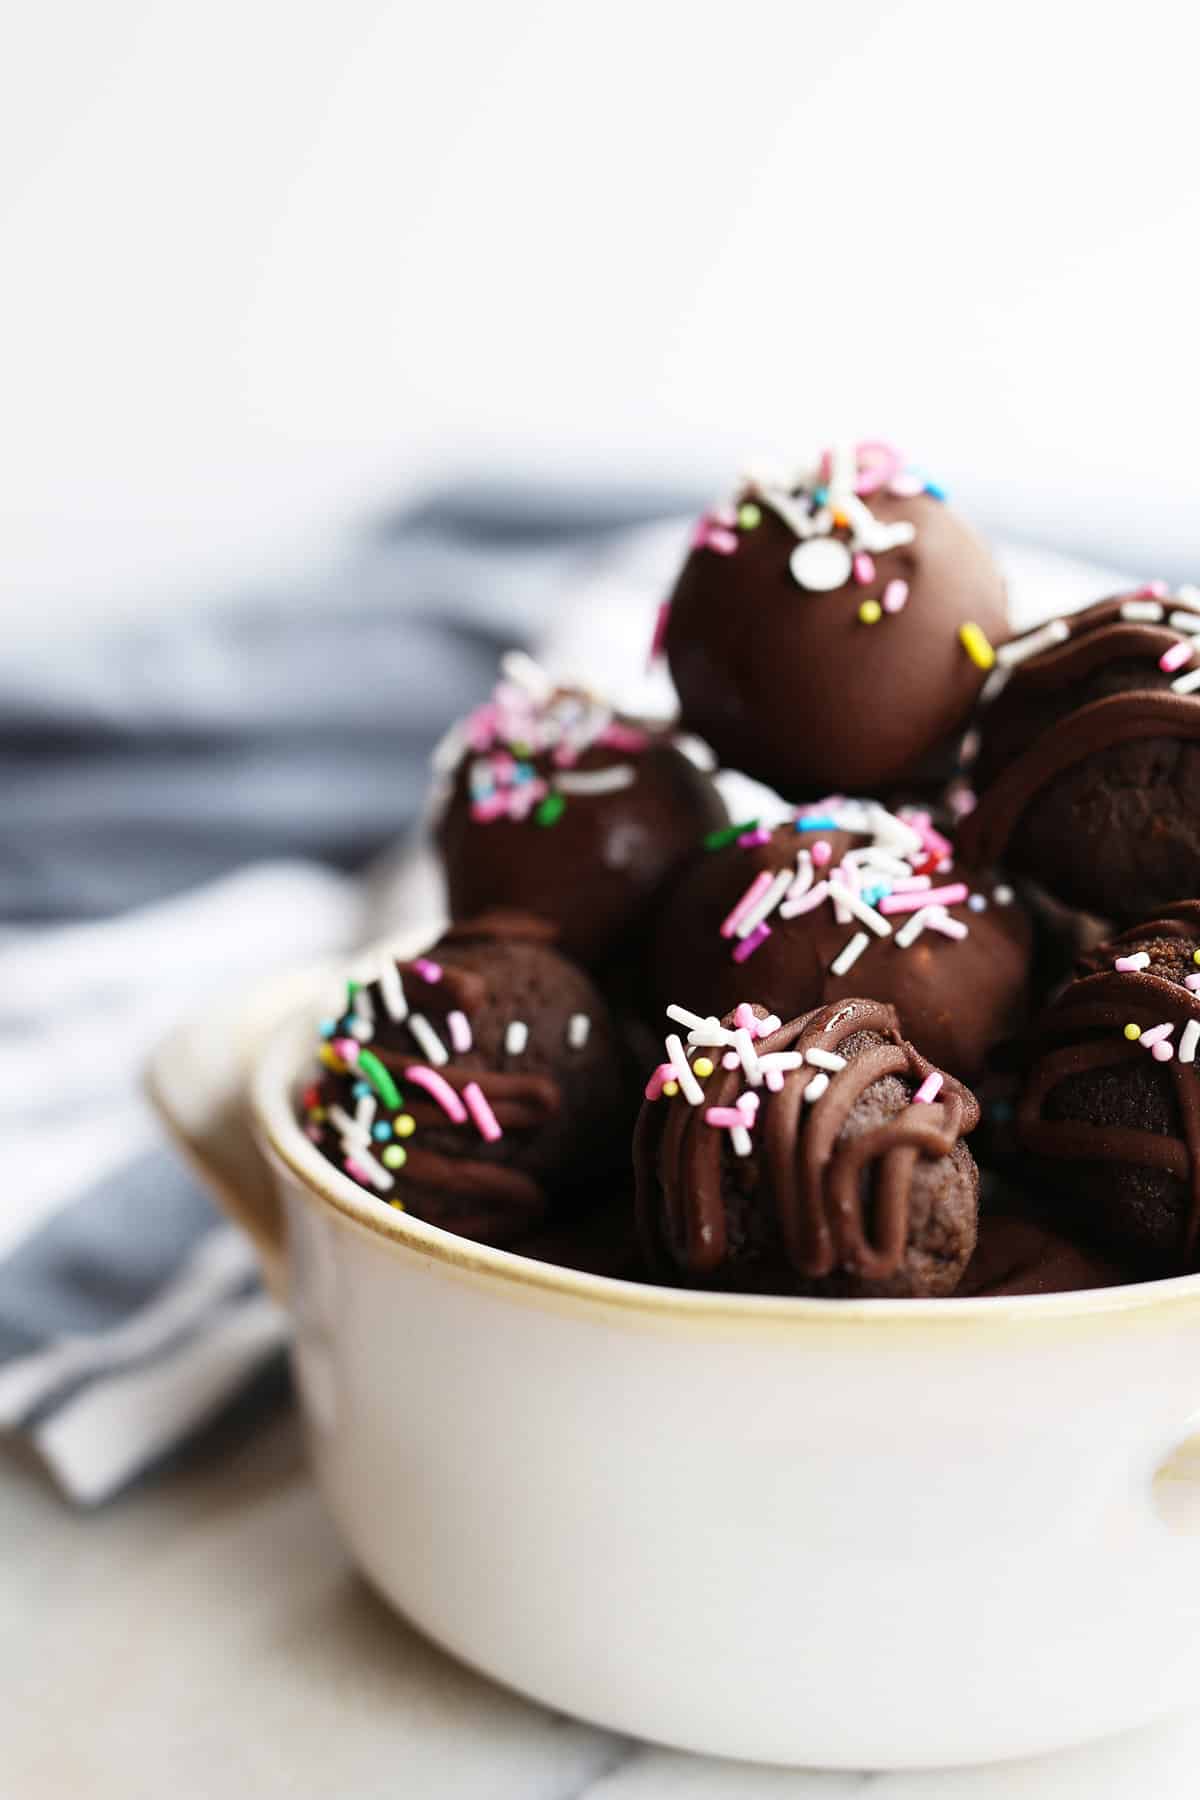 Chocolate Birthday Cake Bites are so easy to make, these ones are vegan and super rich, fudgy and sweet! Great for birthday parties!